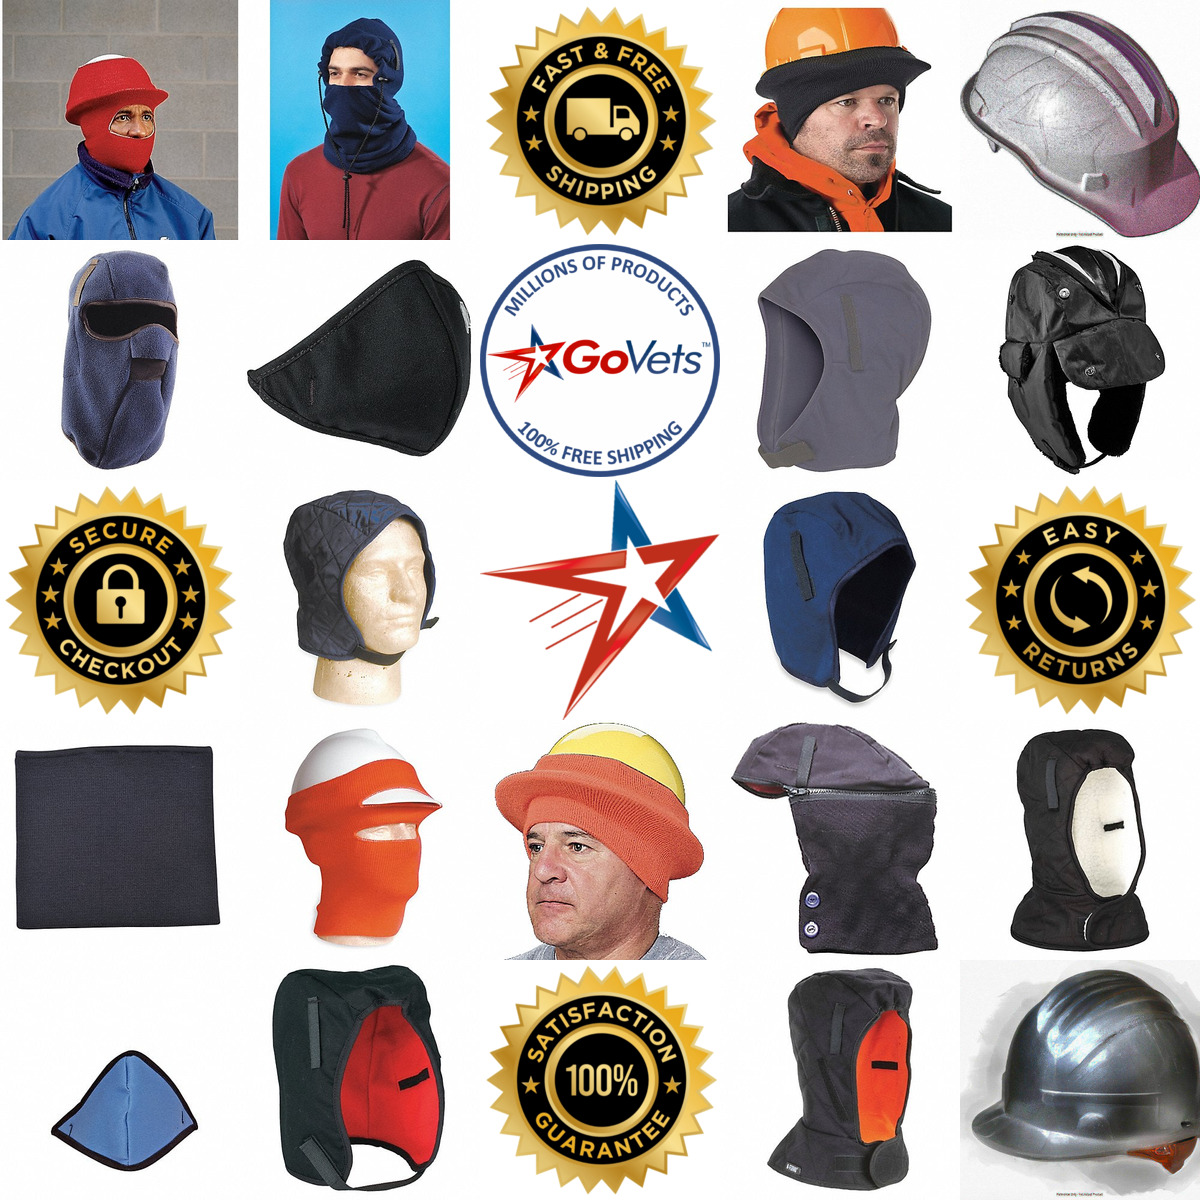 A selection of Hard Hat Liners products on GoVets